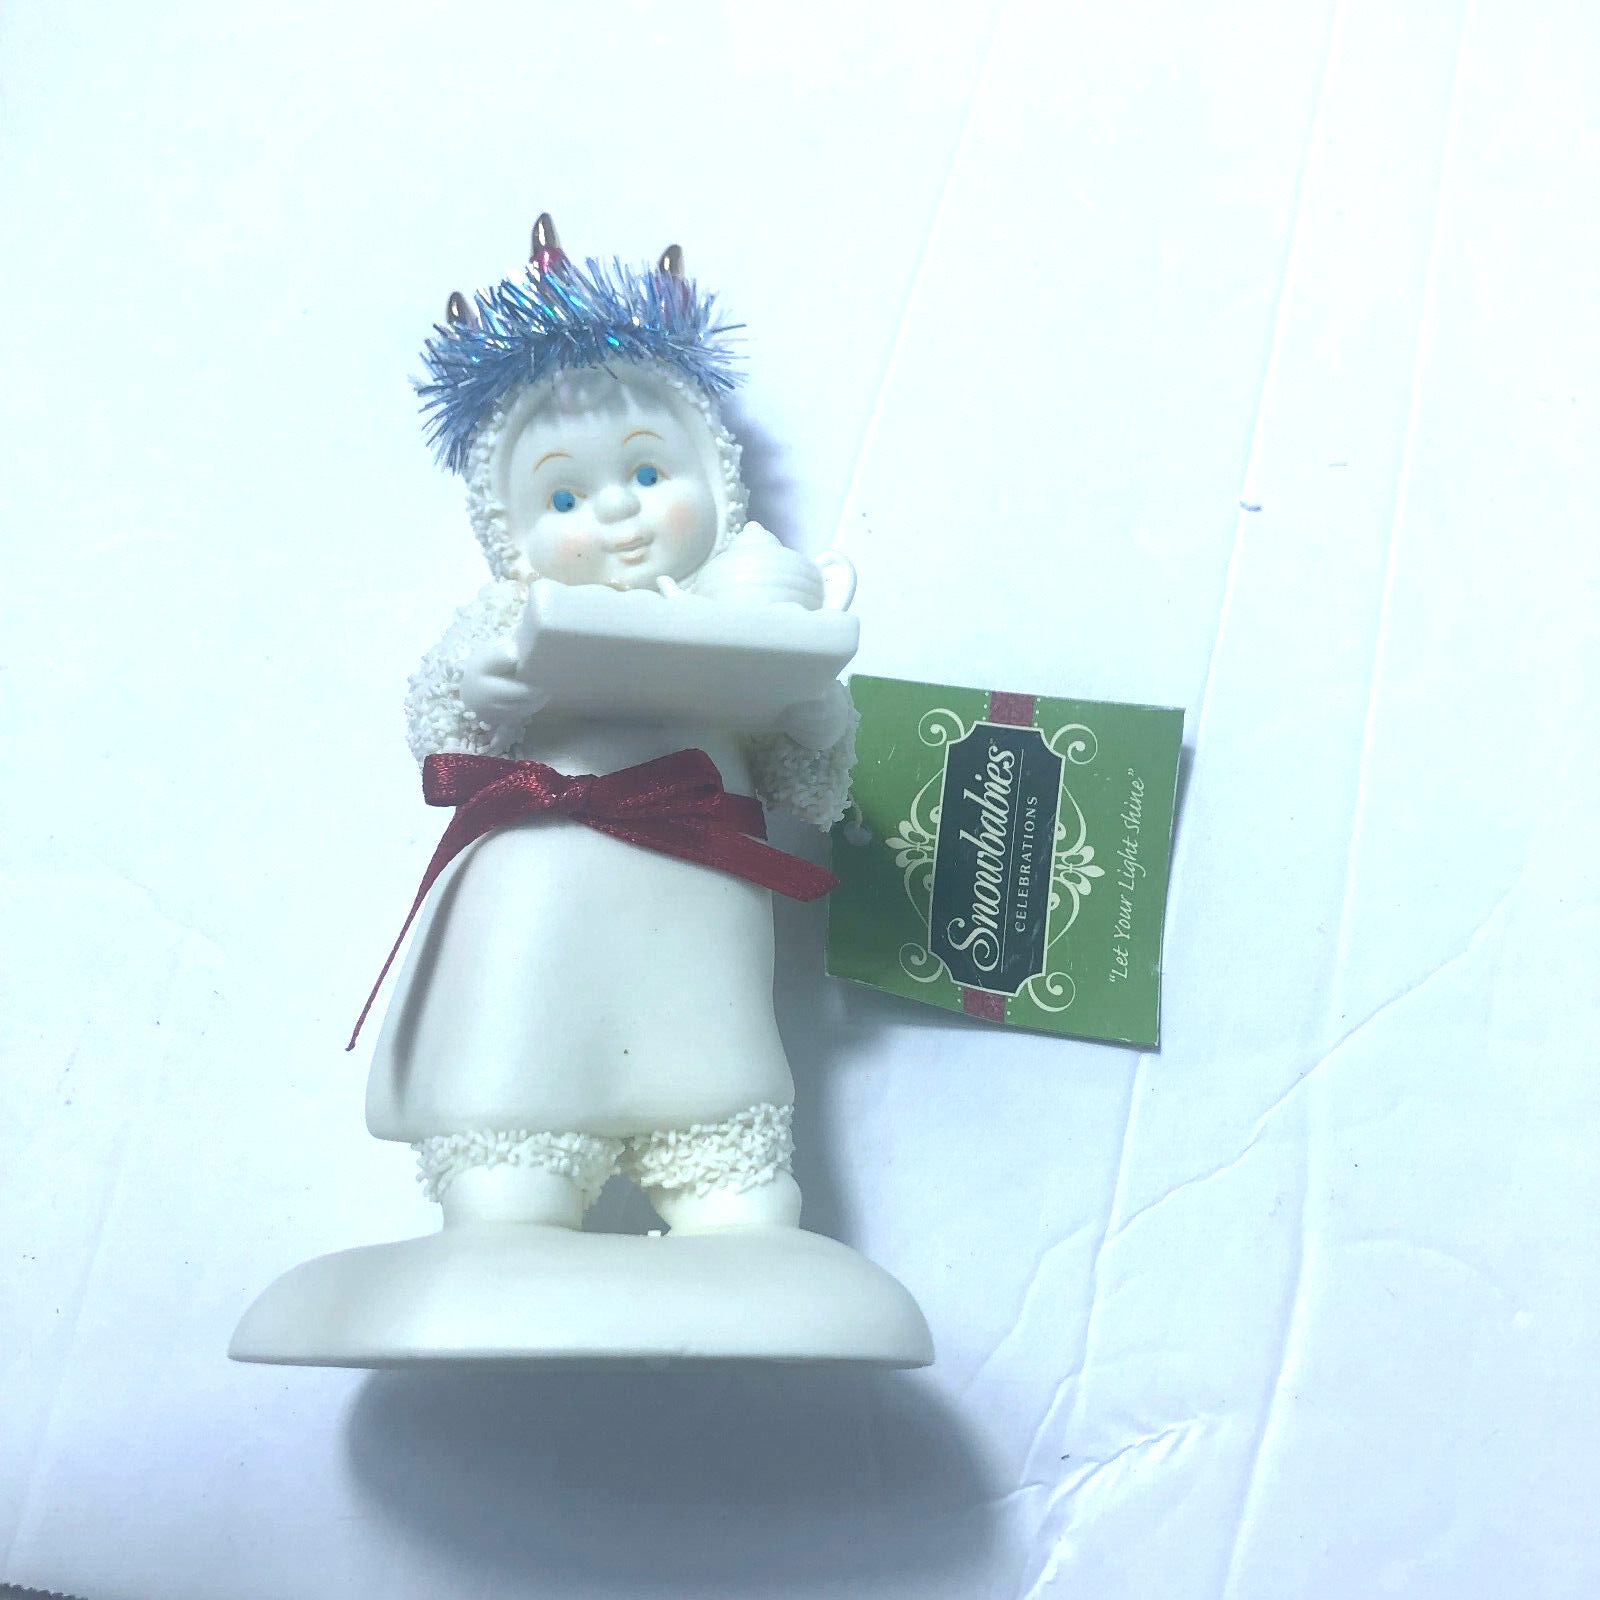 Dept 56, Snowbabies Let Your Light Shine with box and tag.